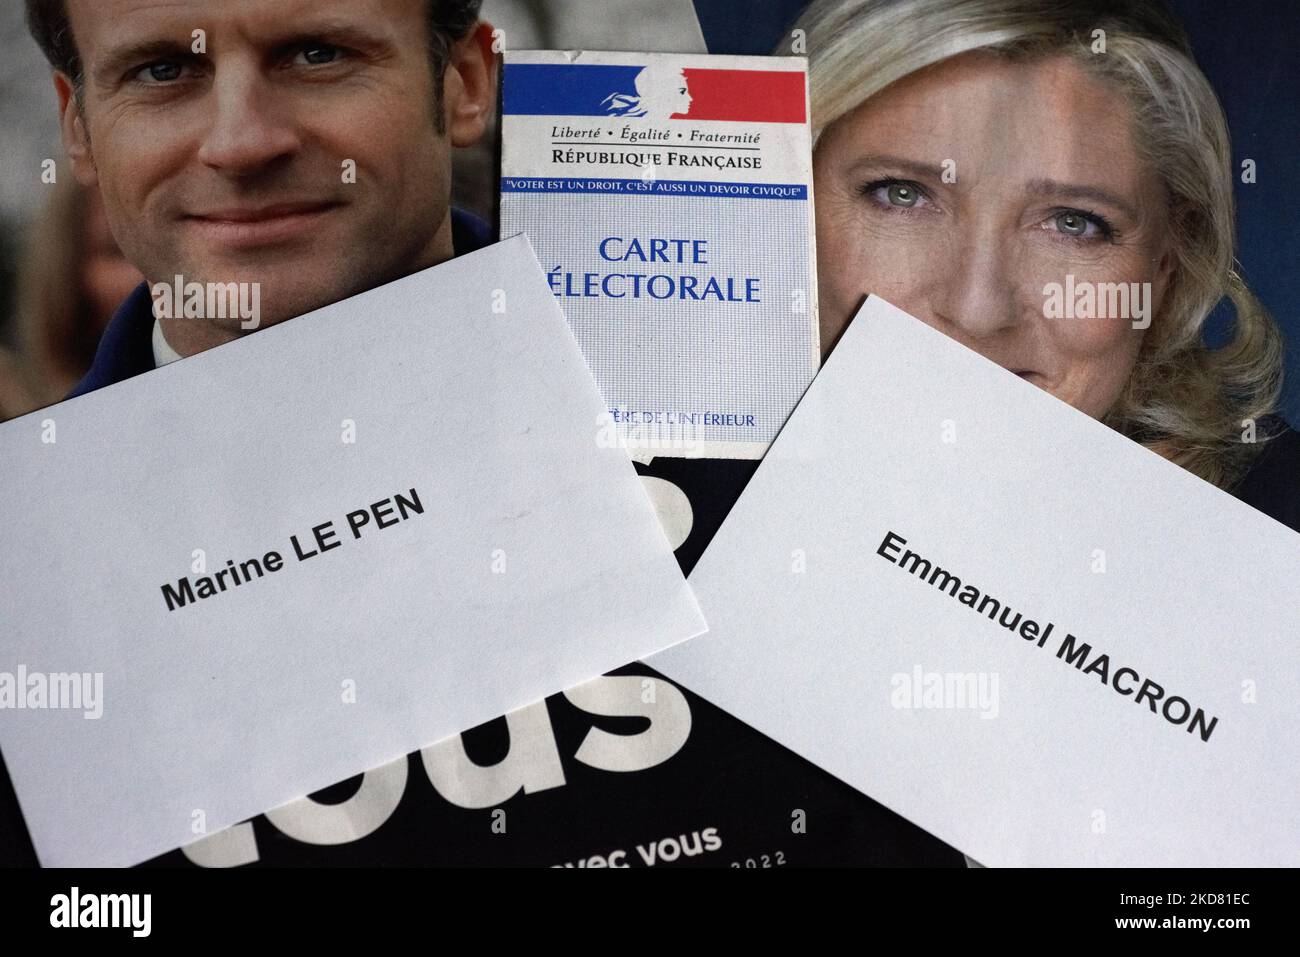 Ballot papers for Macon and Le Pen with a voter card on their programs. Many french voters are undecided for their vote on Sunday 24th April between Emmanuel Macron (current president - right) and Marine Le Pen (far right) for the 2nd round of the French presidential election. Left voters hesitate between Macron, abstention and a blank ballot. Some right voters also don't know for whom they will vote if they don't vote blank or will be abstentionnnists. For now Macron is the favourite to win this election for a 2nd mandate if pollsters are right. Marine Le Pen stands near 48%. Toulouse. France Stock Photo